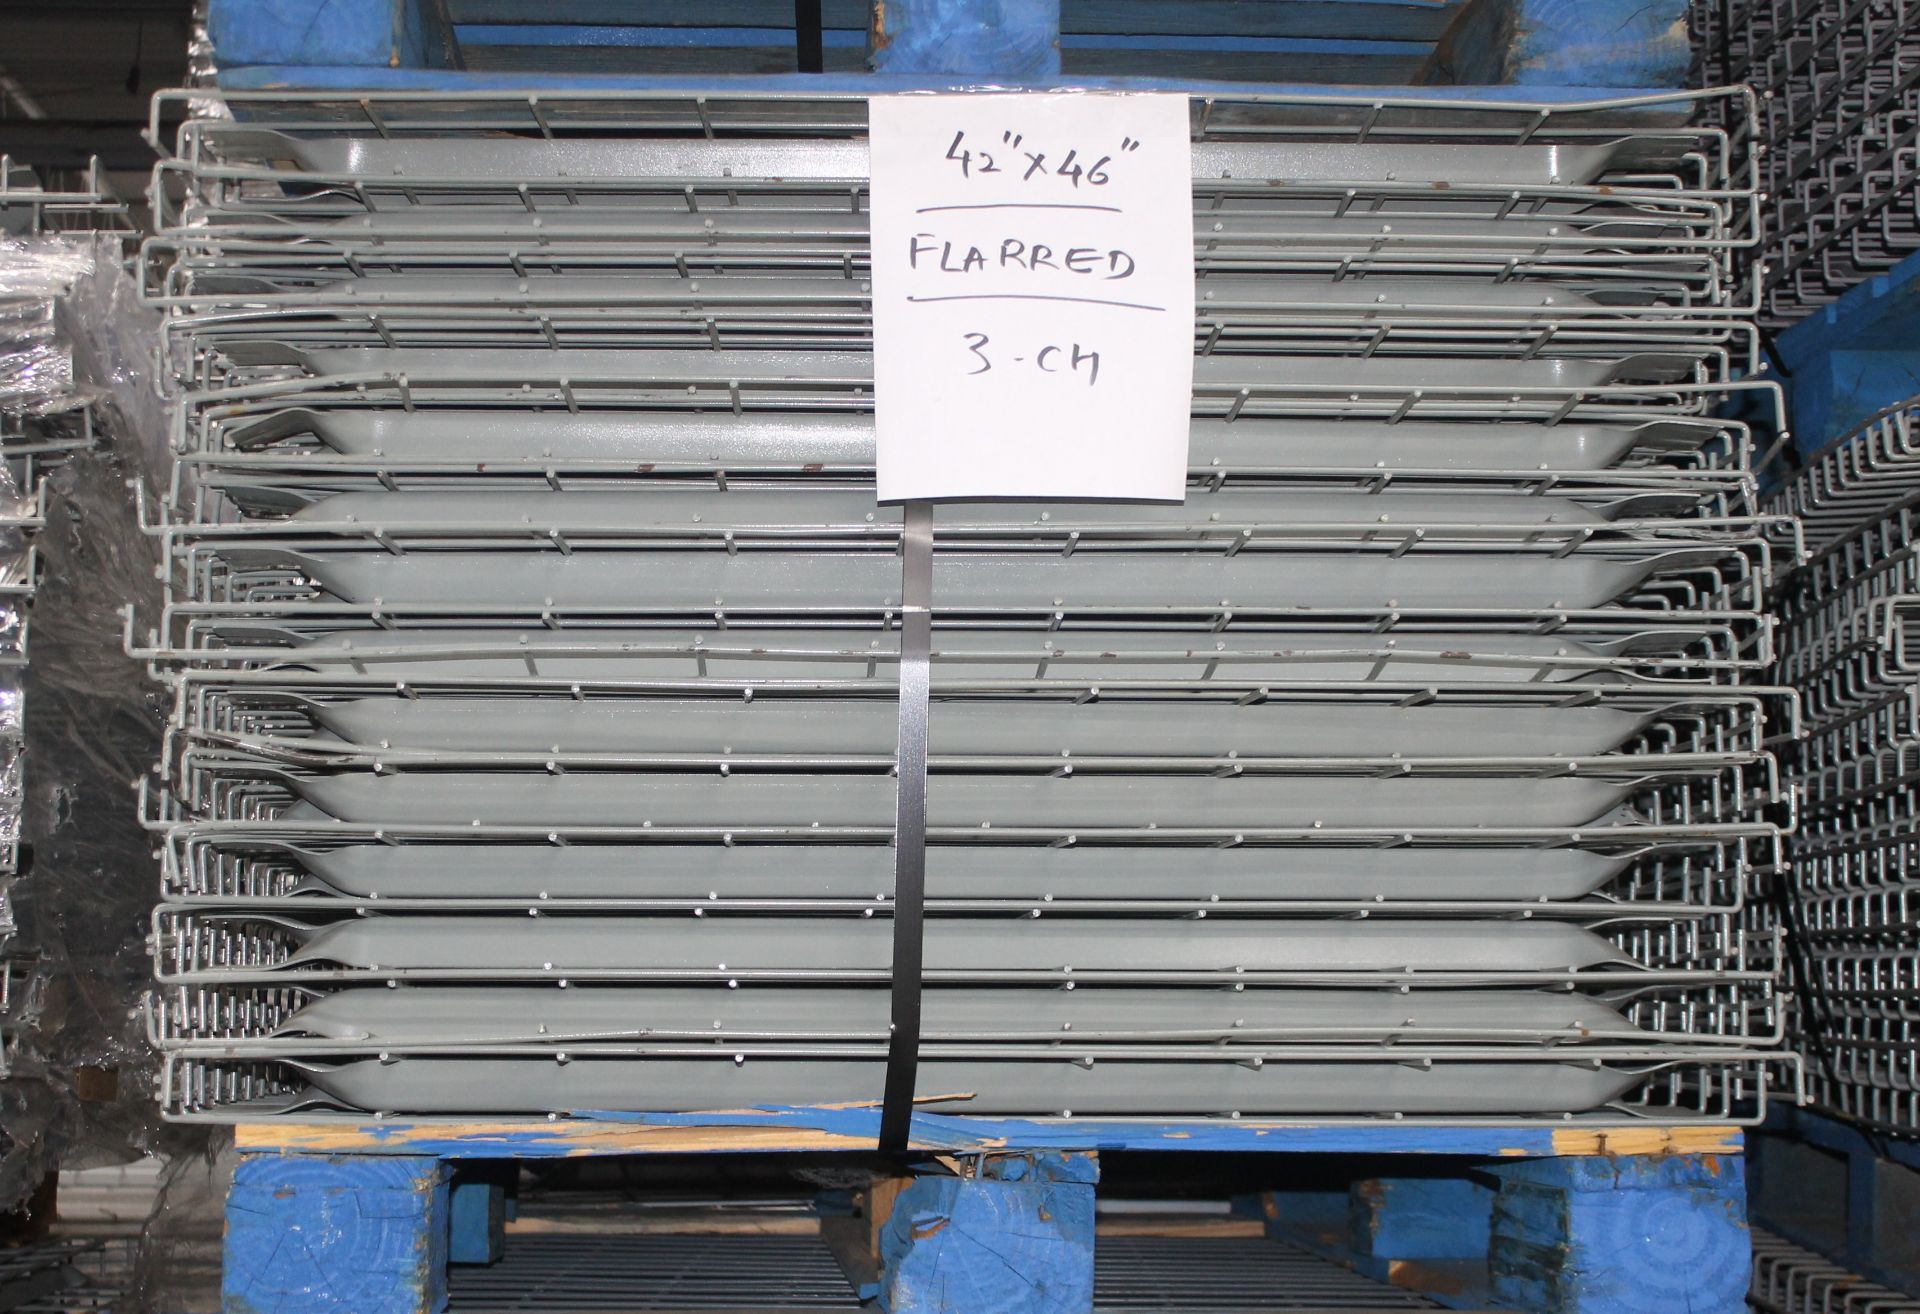 80 PCS OF 42""D X 46""W FLARED WIRE DECKS - Image 2 of 2